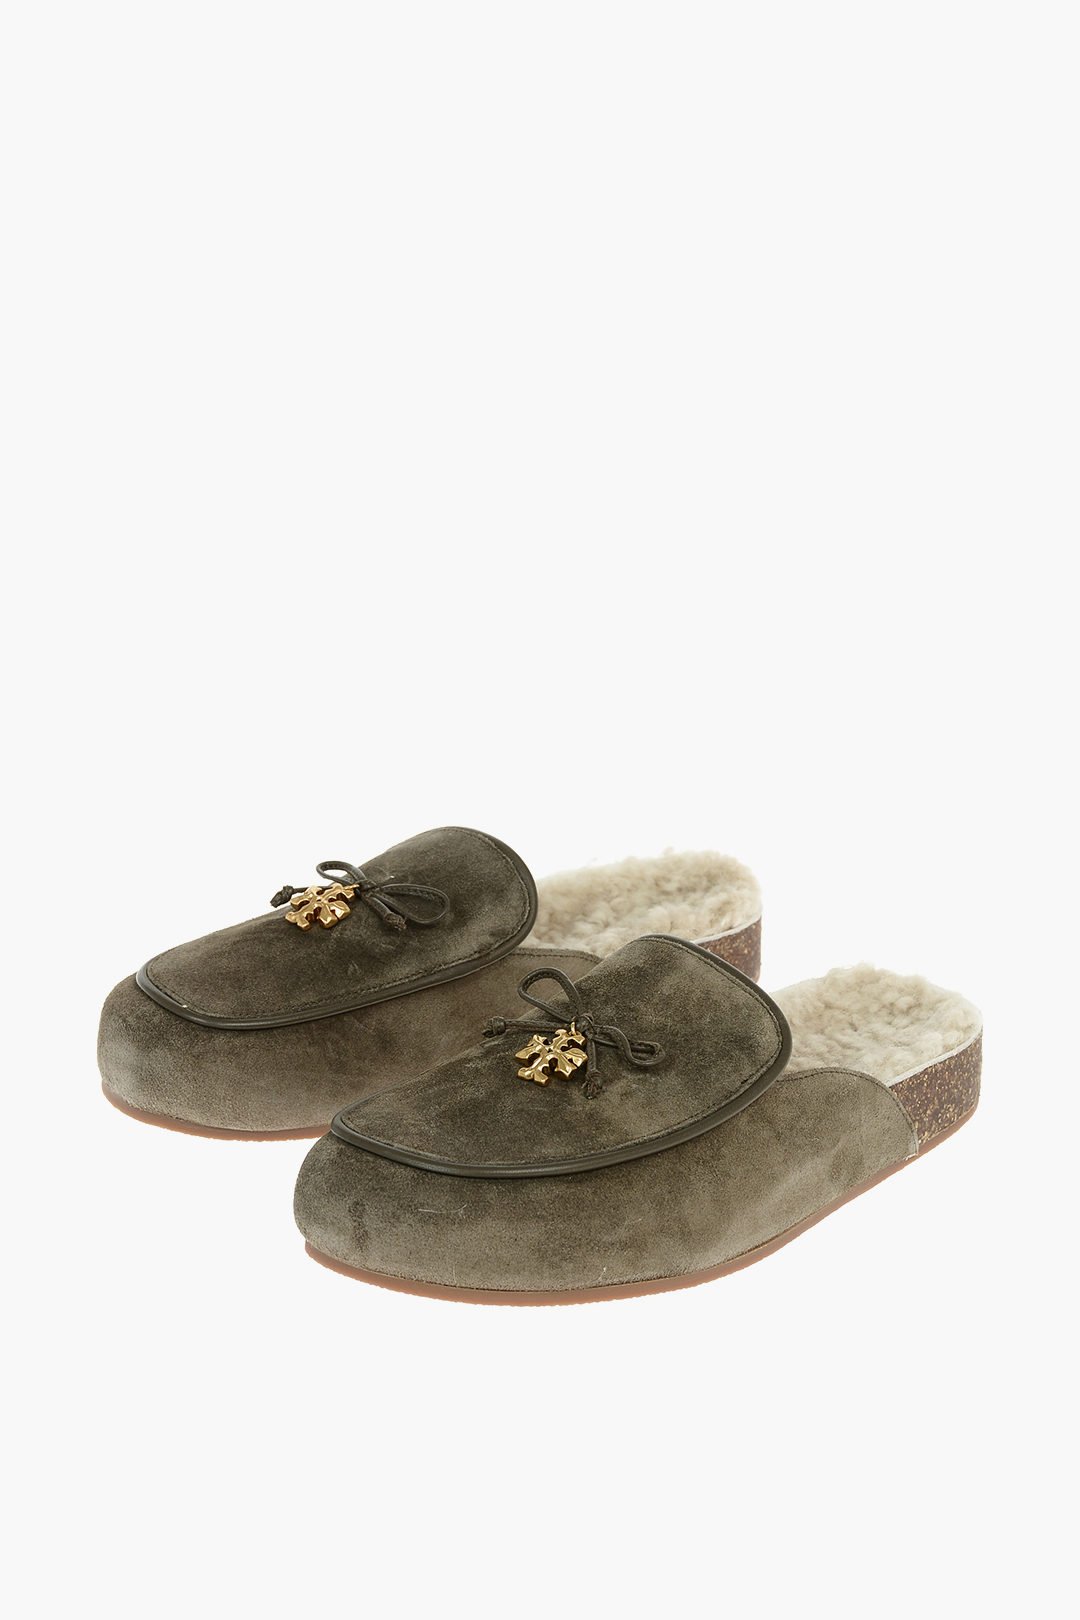 Tory Burch Suede Leather TORY CHARM Shearling Slippers embellished with  Brushed Gold Charm women - Glamood Outlet